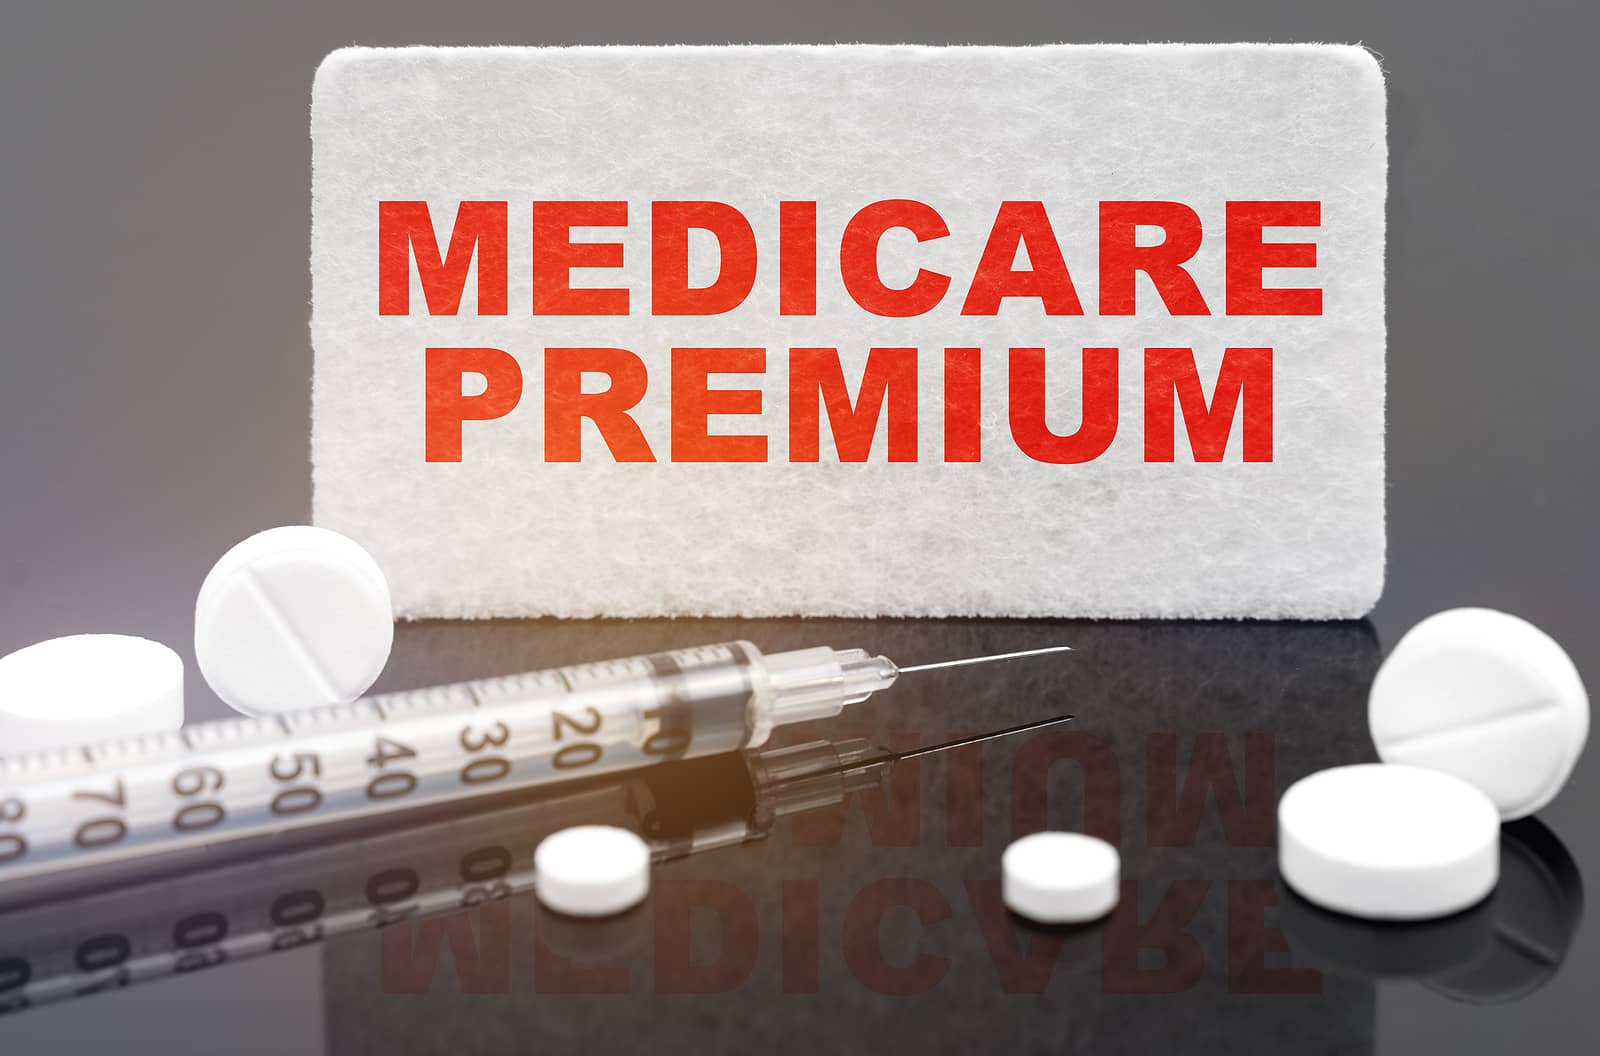 Will the Medicare Part B premium be reduced.